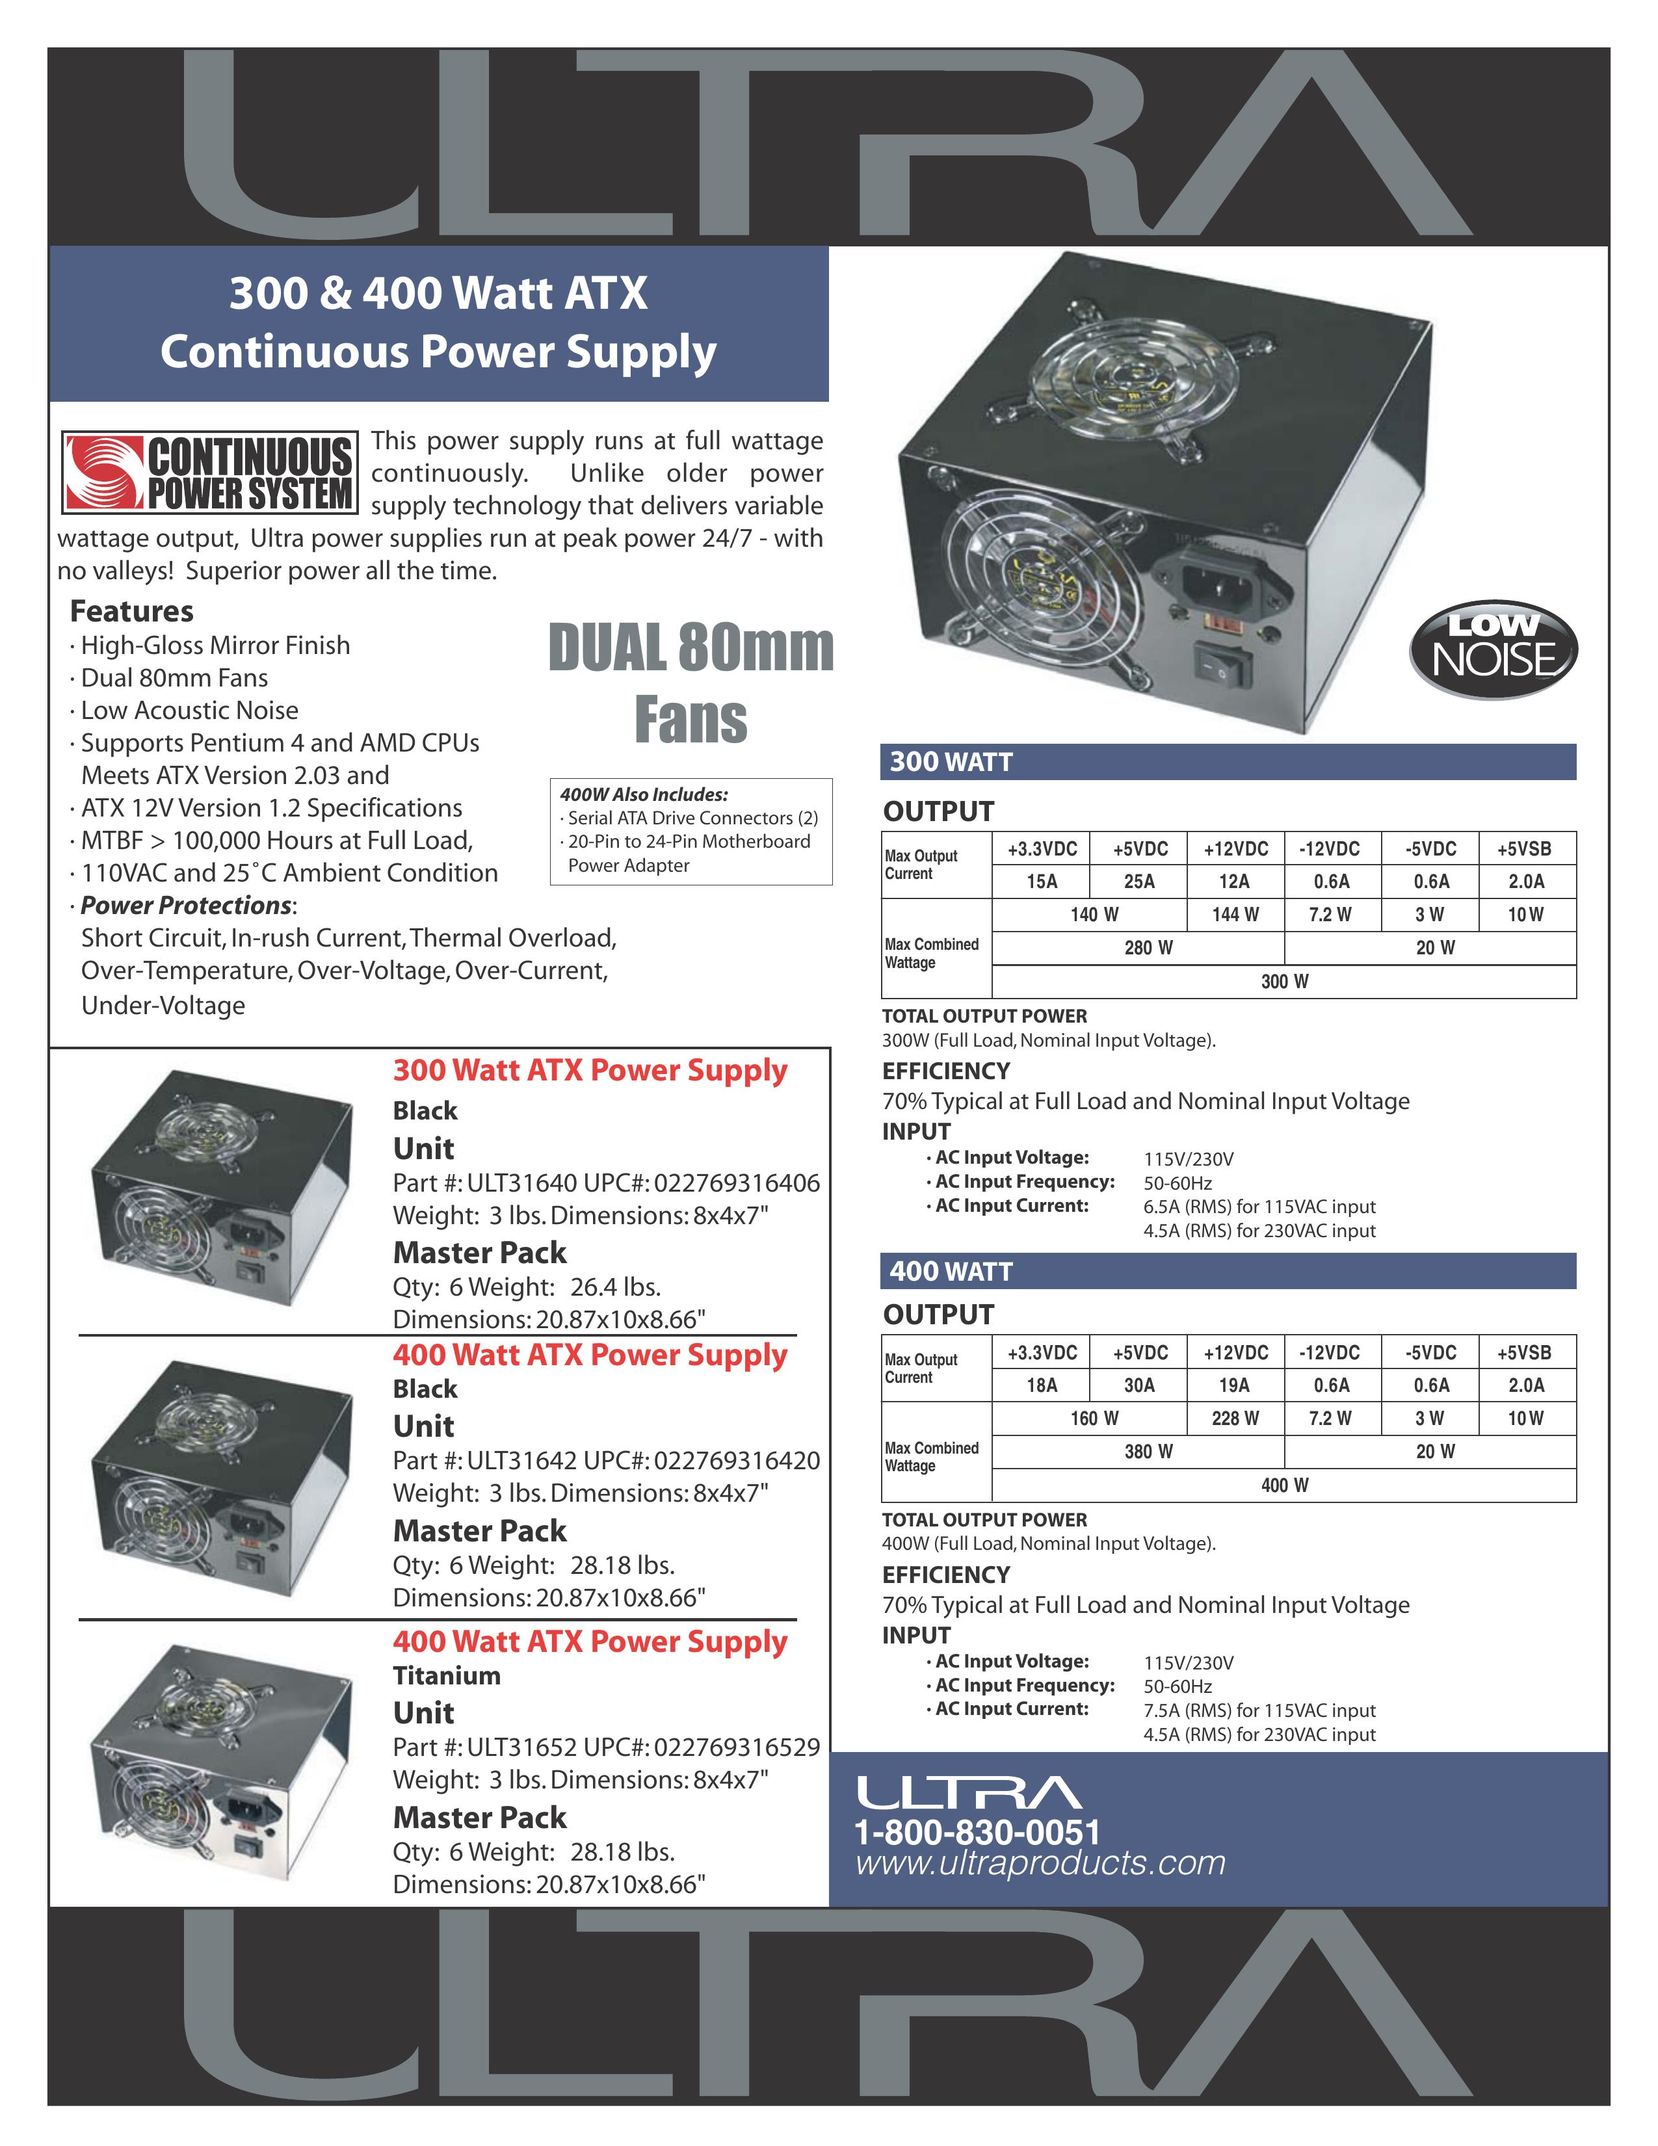 Ultra Products ULT31640 Power Supply User Manual